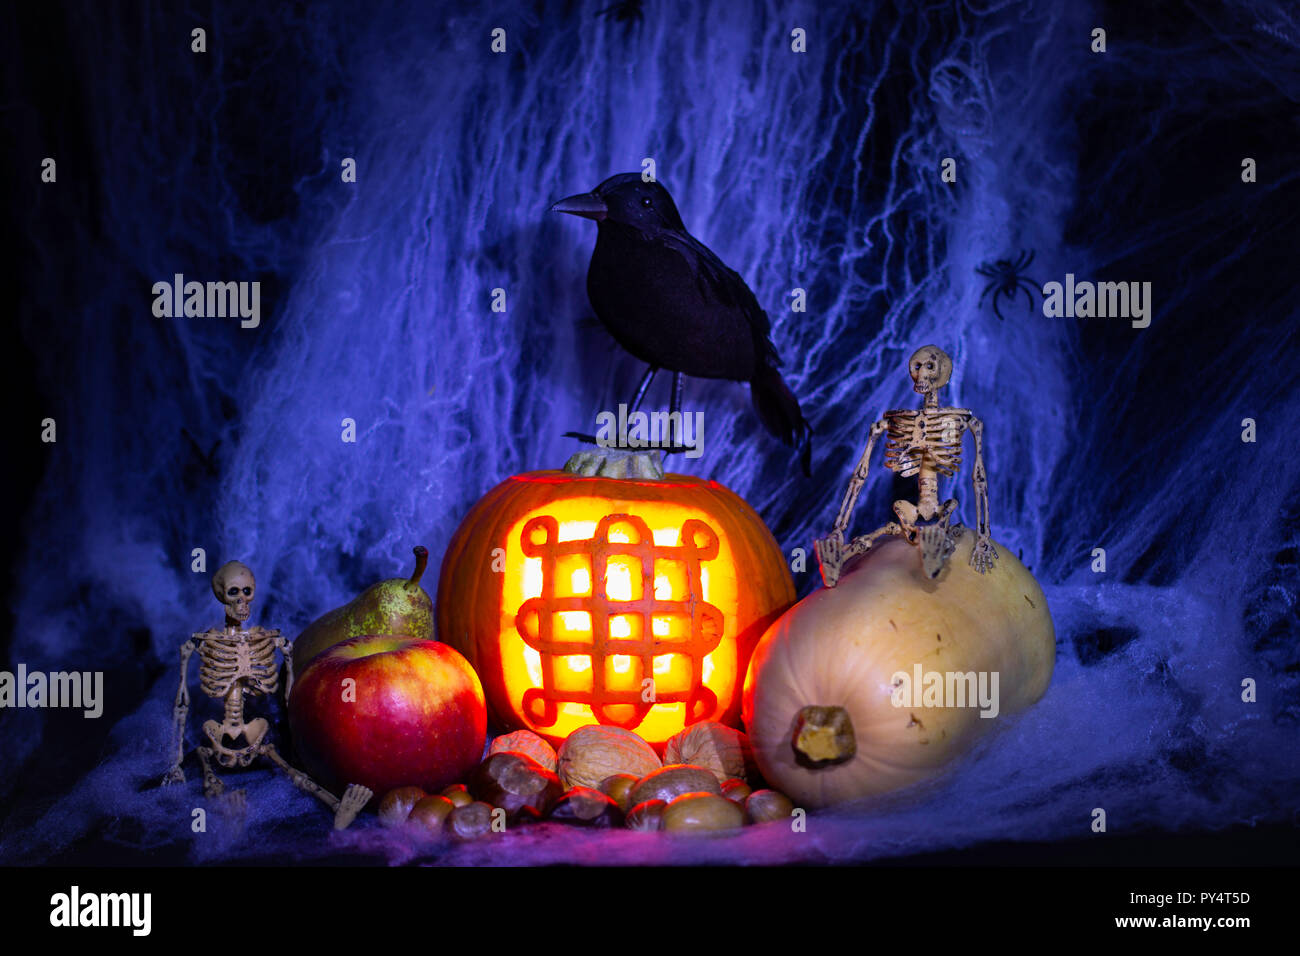 Samhain/Halloween/Celtic New Year still life. Lit carved pumpkin with samhain symbol, fruit, nuts & veg with toy black bird, toy skeletons & fake web. Stock Photo